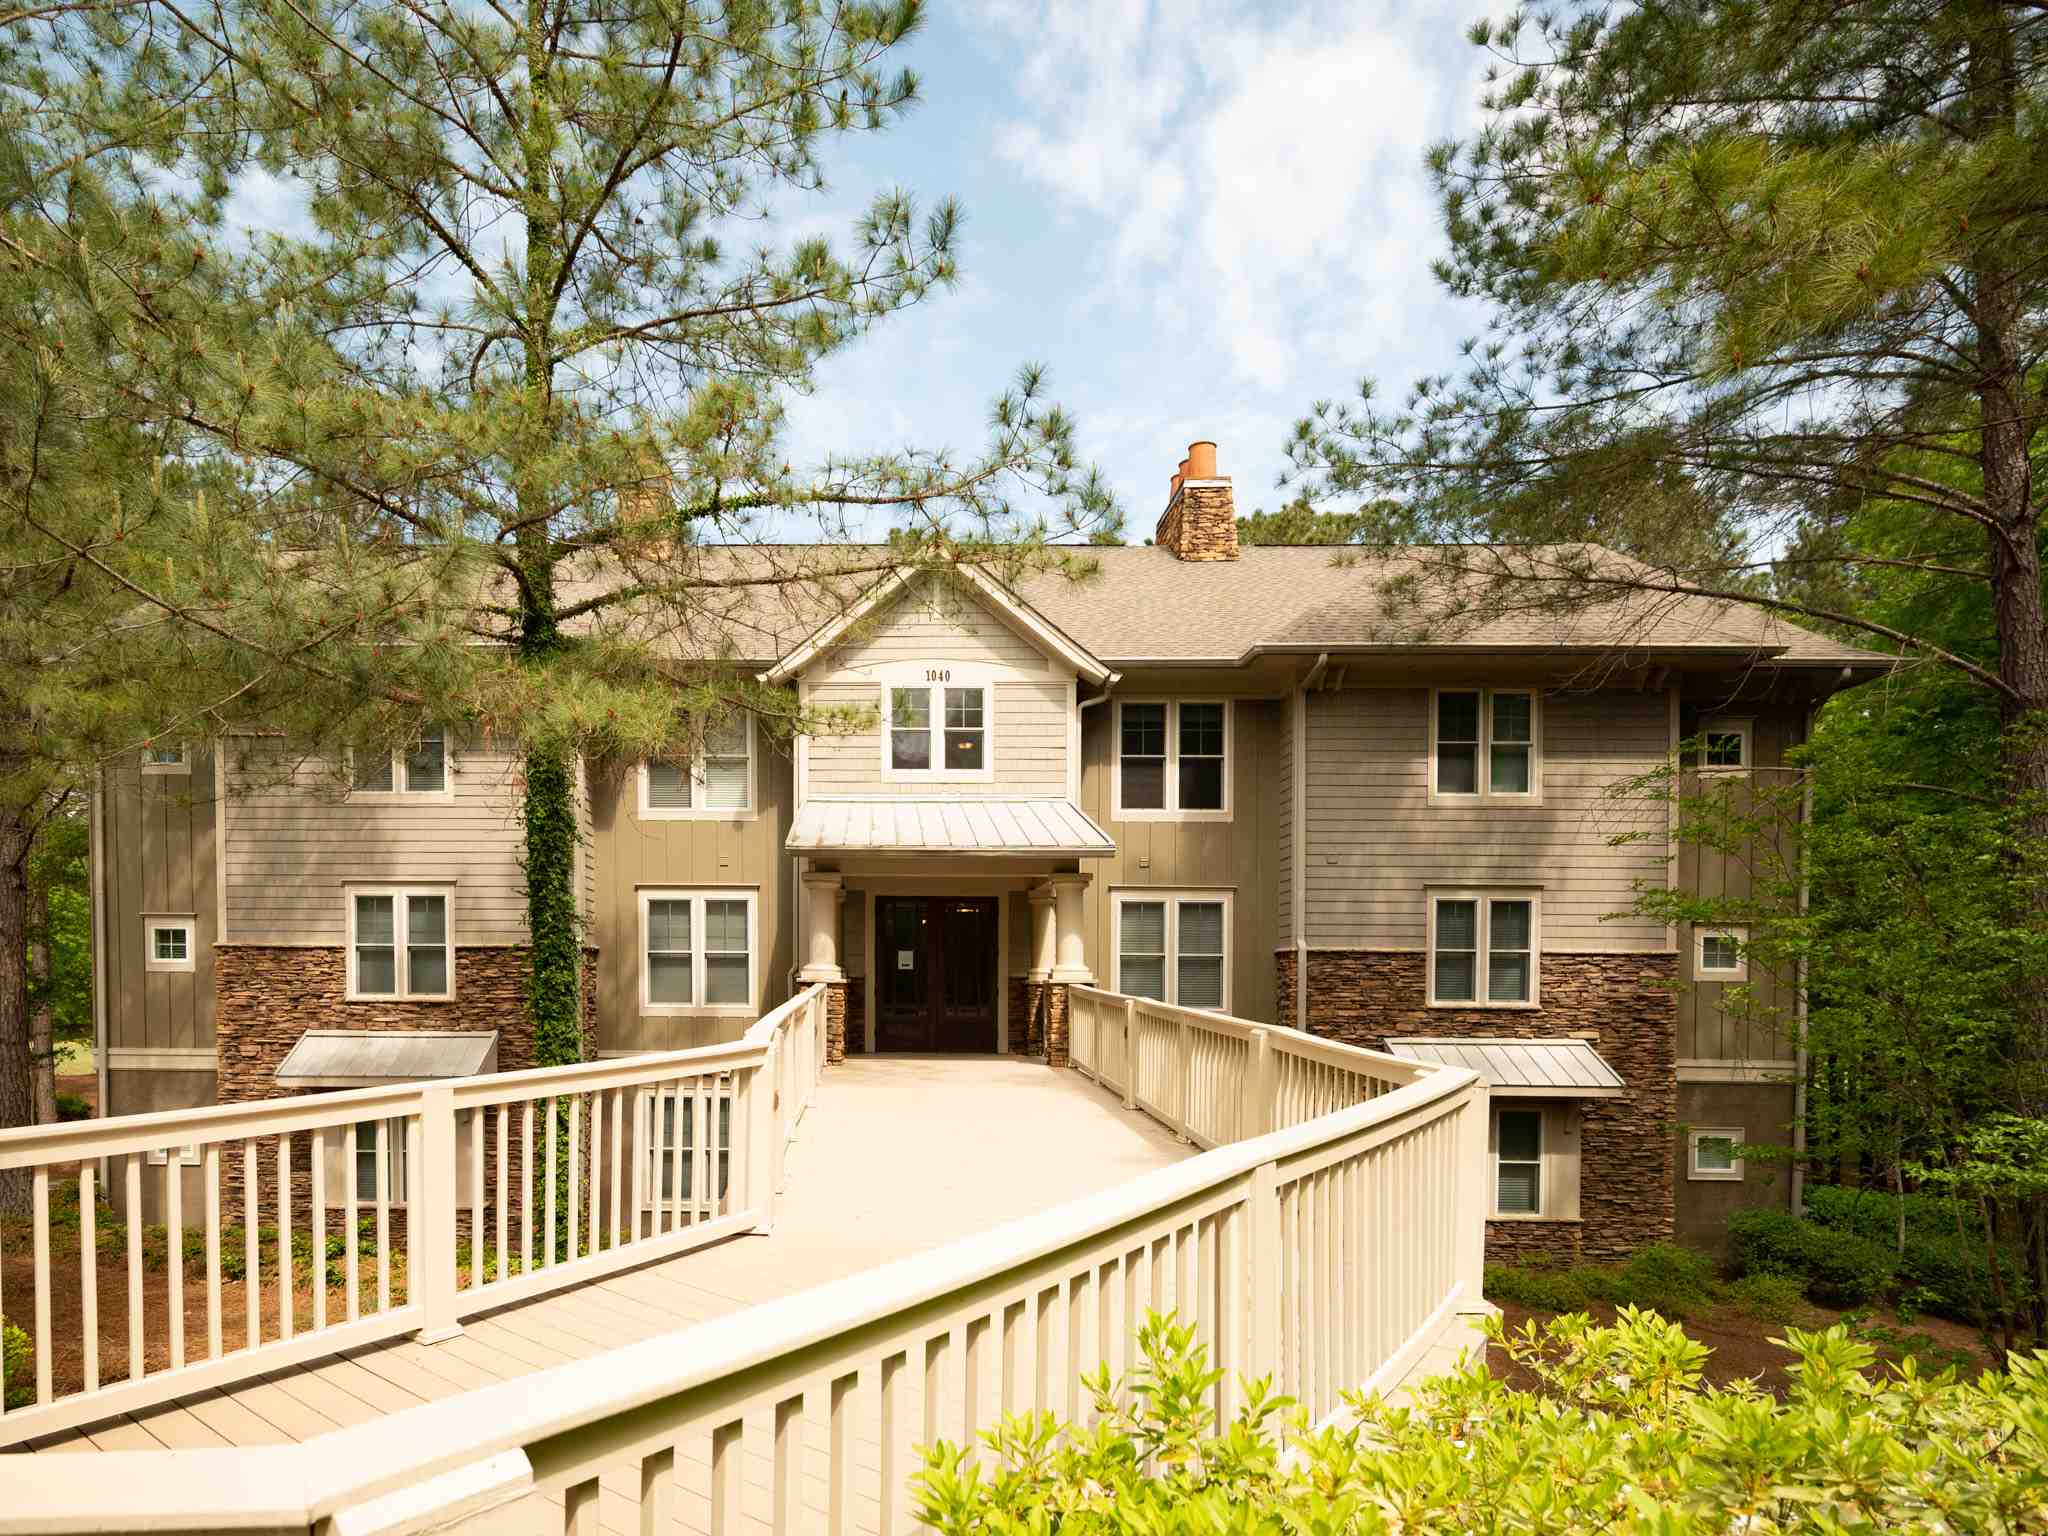 Great condo located on the 16th hole of the Oconee Course, designed by Rees Jones. The terrace level, covered patio overlooks the beautiful water feature and golf view.  Master suite offers spacious walk-in closet, private access to covered patio and bath with separate shower and soaking bathtub. The great room features a fireplace with gas logs, built-in cabinetry, and large windows framing the golf course. The dining area has access to terrace level covered patio. Kitchen boasts granite countertops and raised breakfast bar. Guest room has convenient access to full hall bath. There is a detached single-bay garage with storage. Seller makes a Club membership available for Buyer to learn more about how they can enjoy six carefully crafted golf courses, a unique sporting ground, tennis, fitness, and all the recreational and culinary amenities befitting a world-class private club.